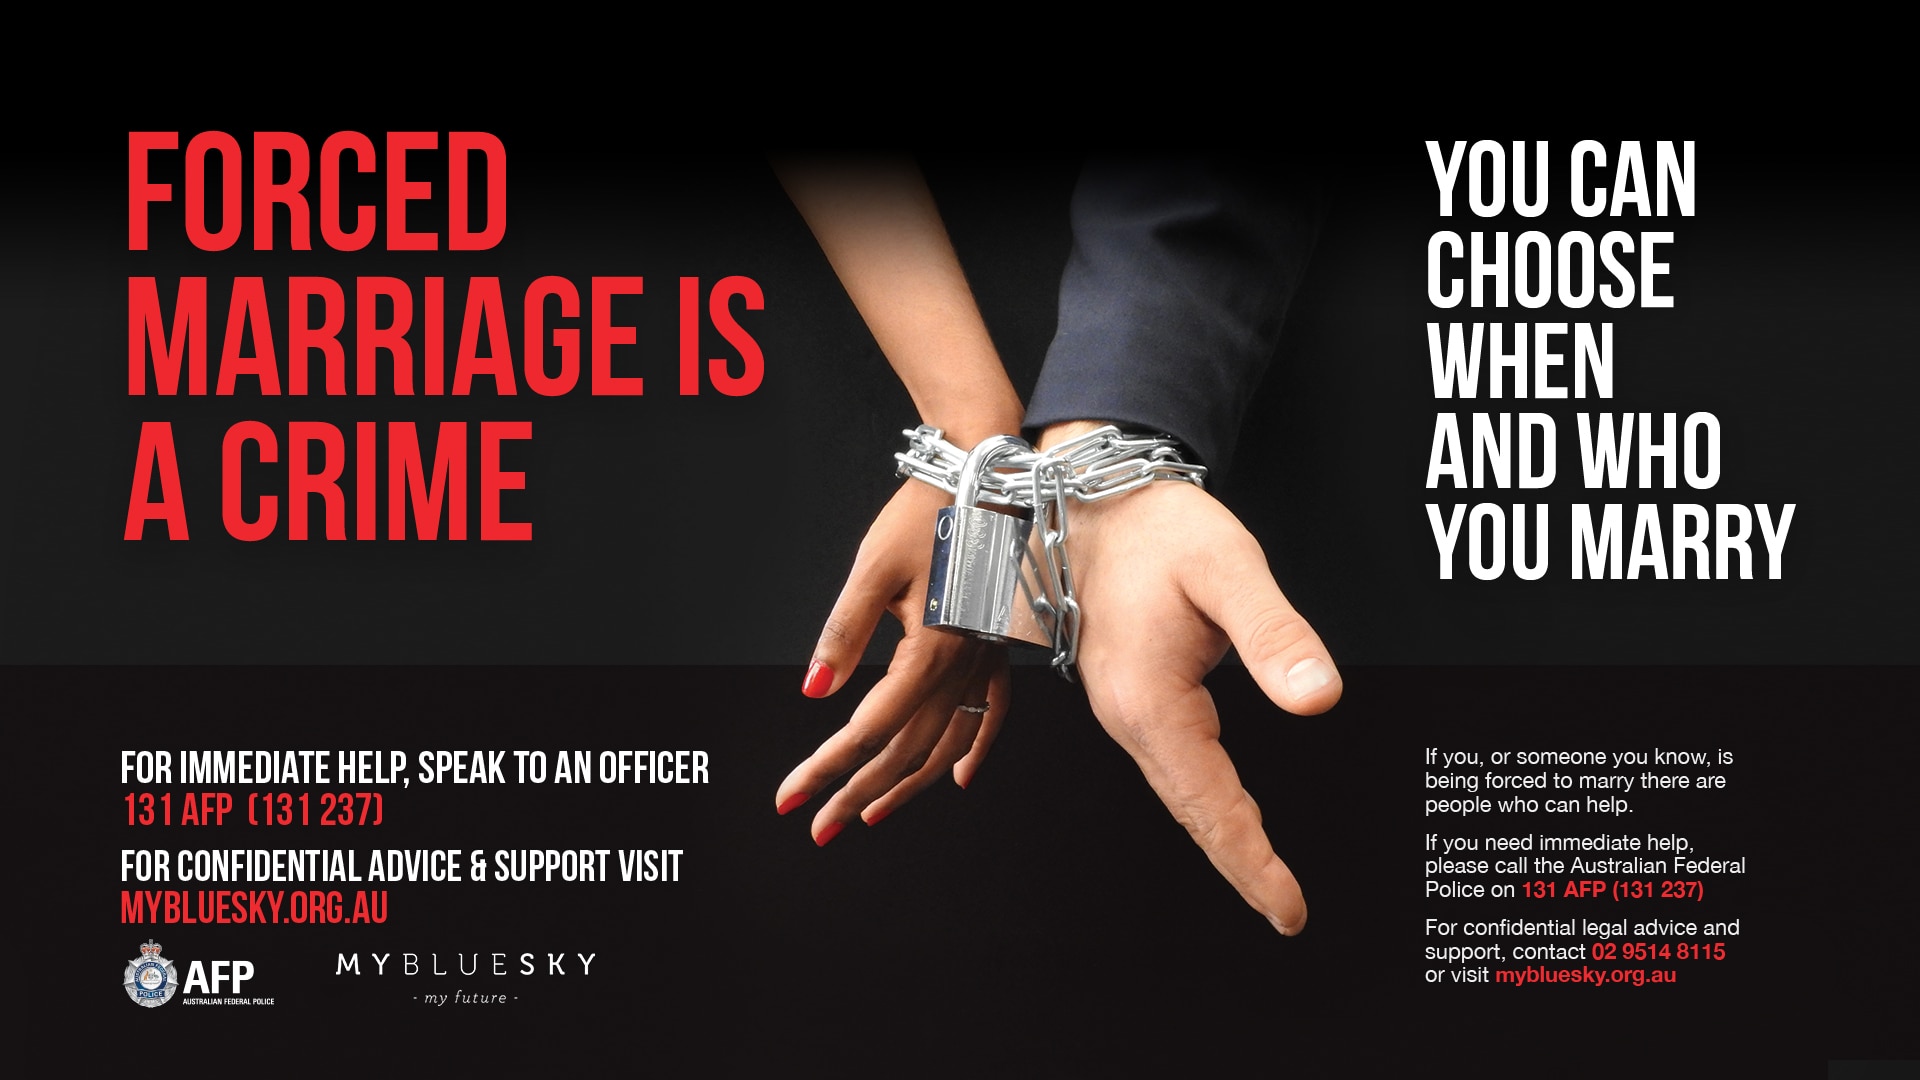 Forced marriage posters being rolled out across Sydney airport